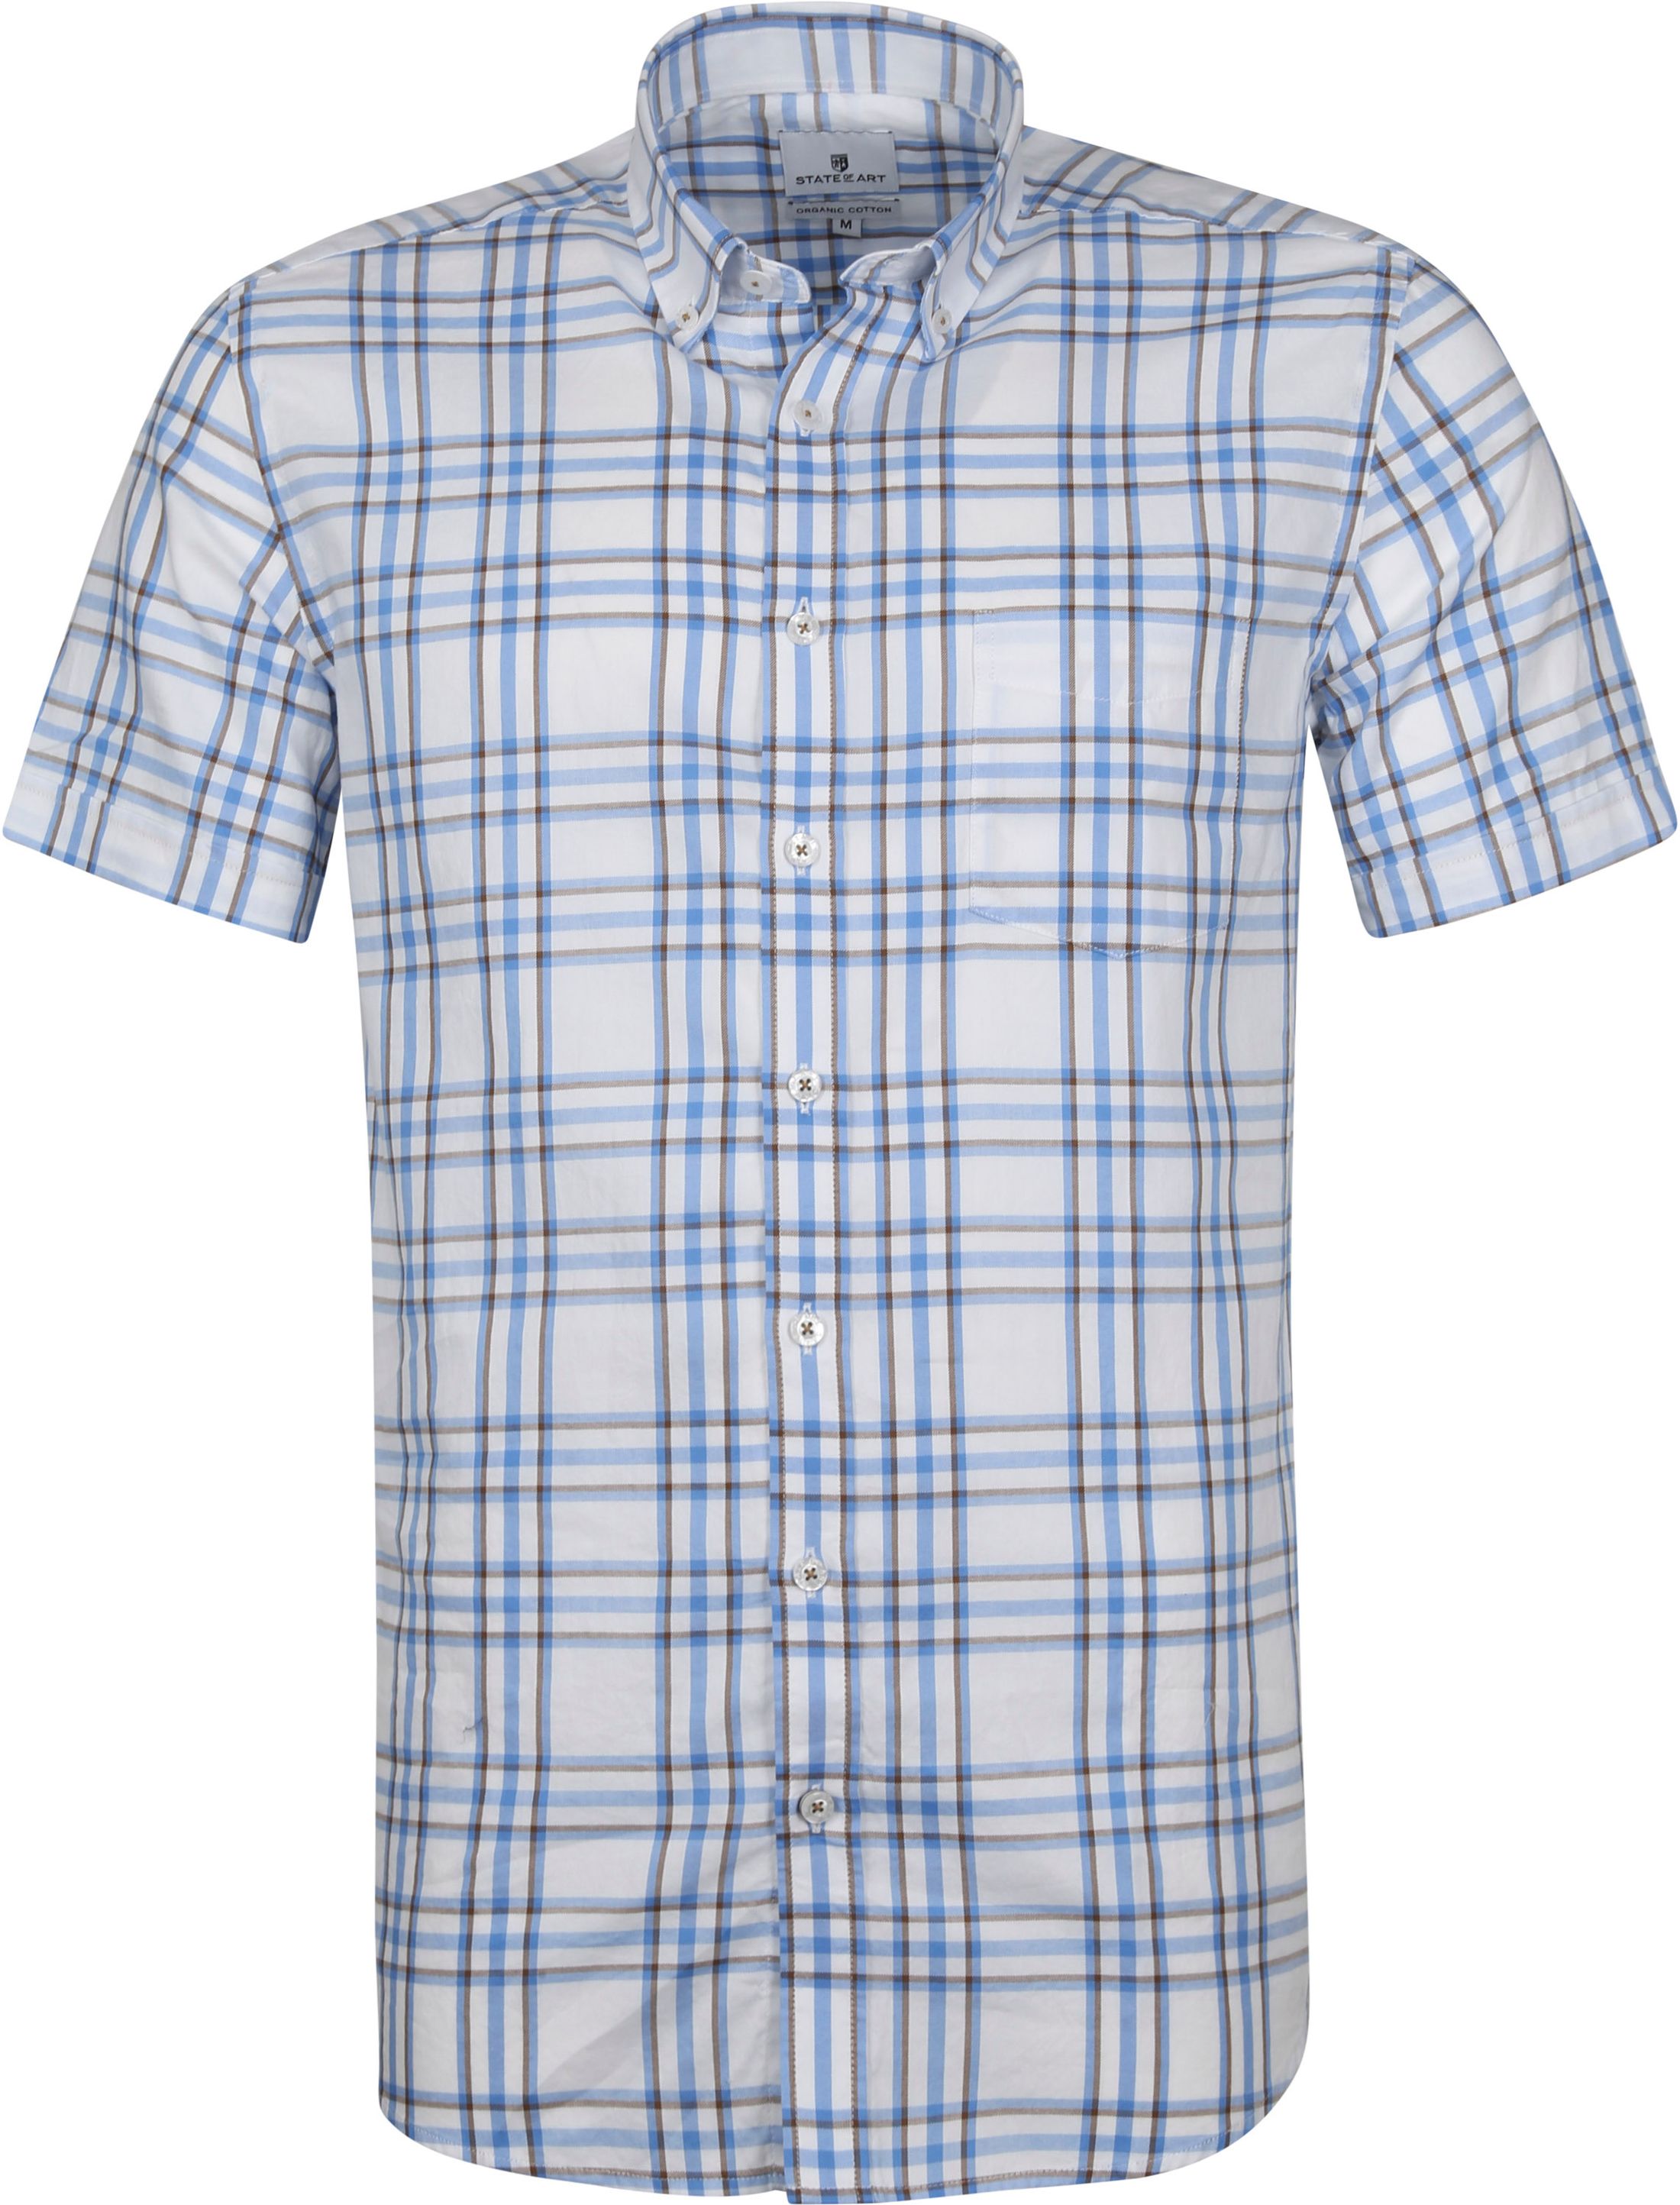 State Of Art Chemise A Carreaux Manches Courtes Bleu taille L